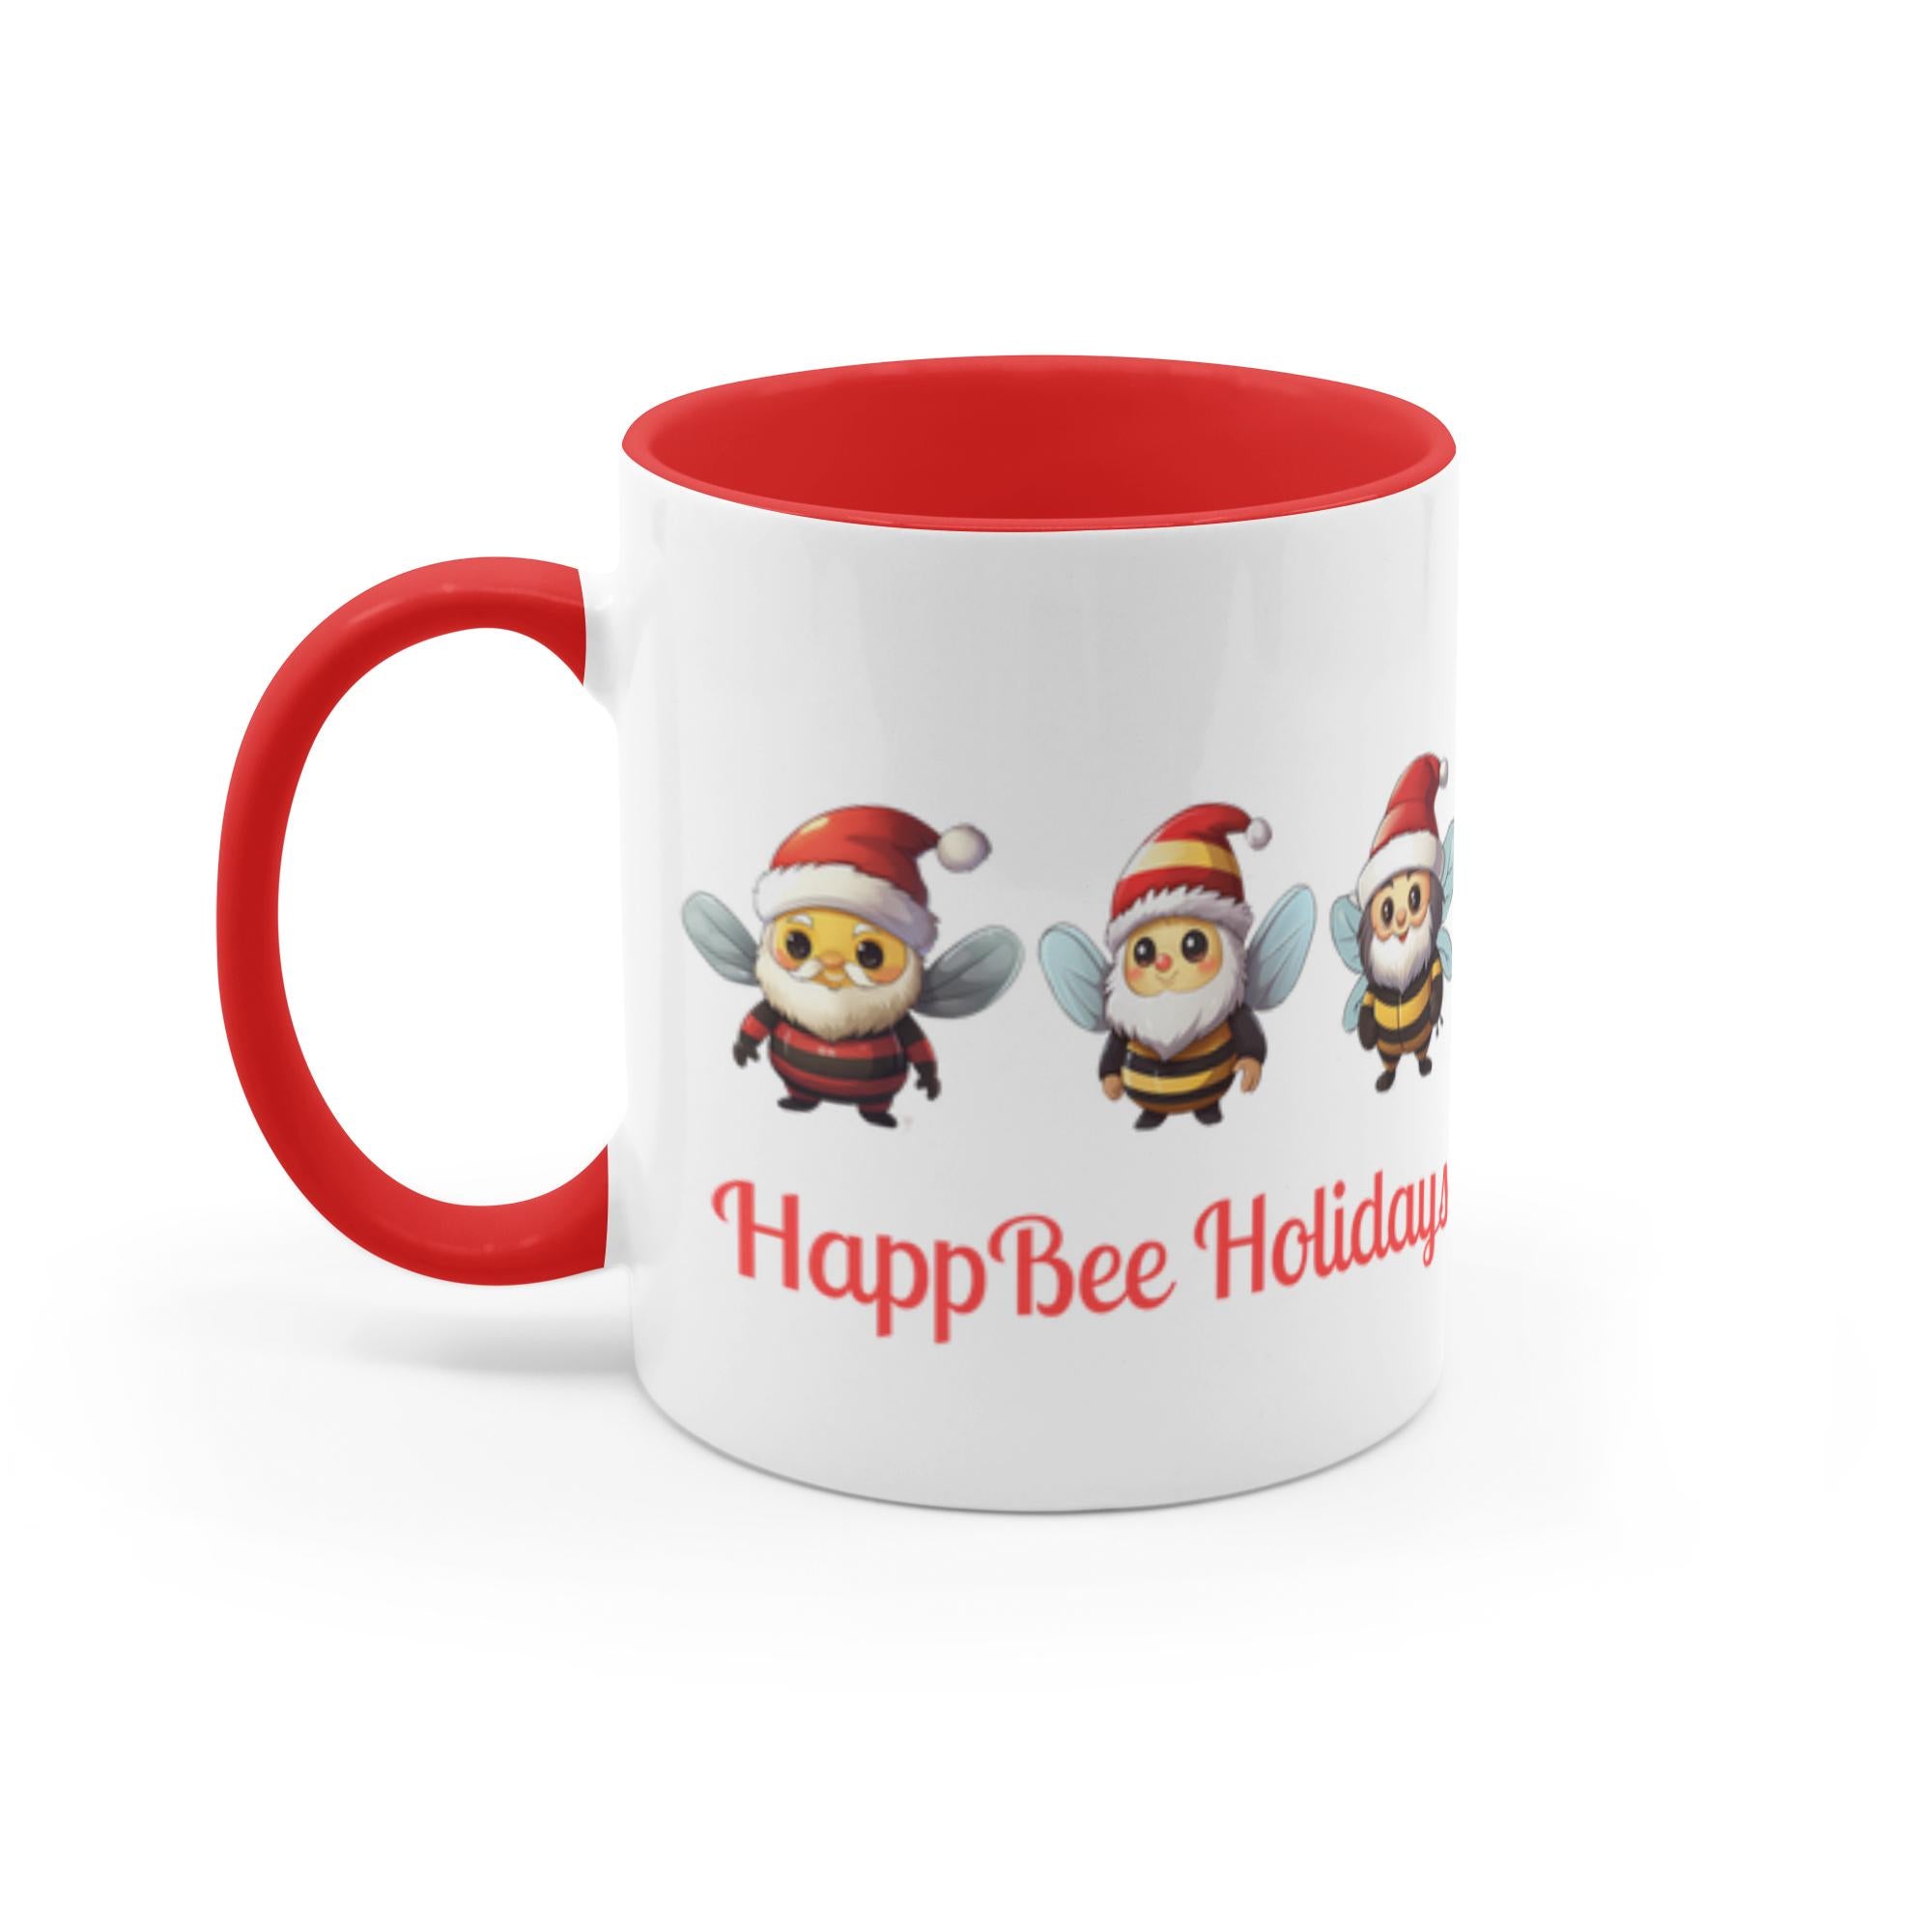 HappBee Holidays 11 oz. Accent Mug Coffee & Tea Cups gifts holiday store